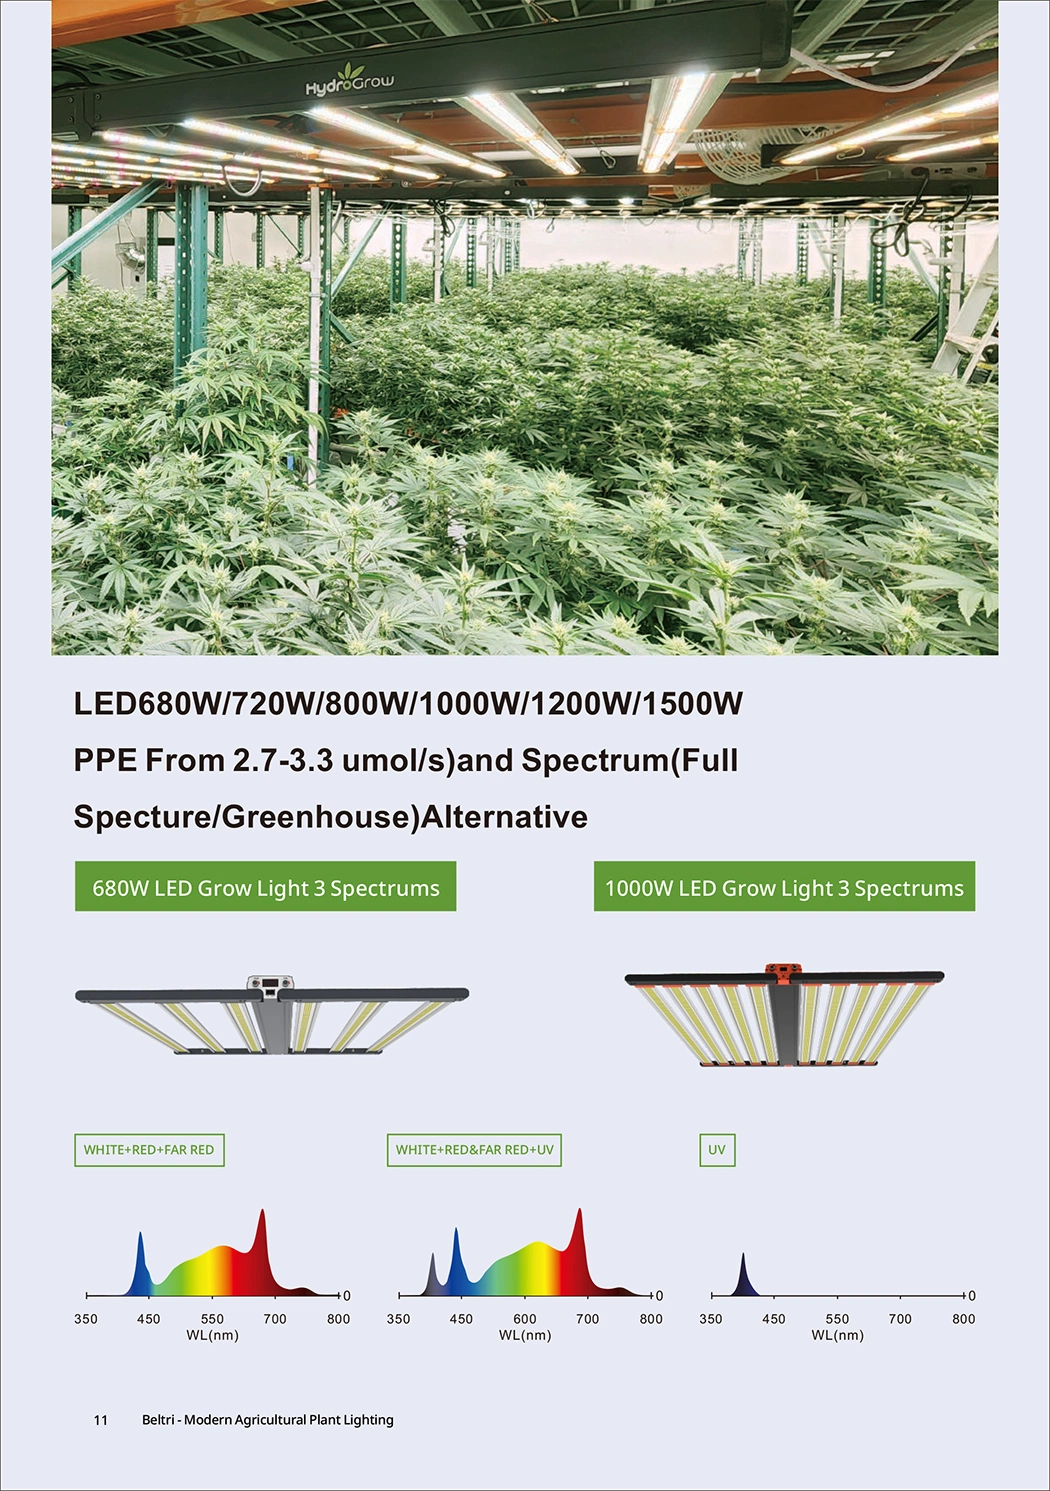 Grow Lights for Indoor Plants Non-Insolation 680W Driver Inside PPE 2.8 Umol/J